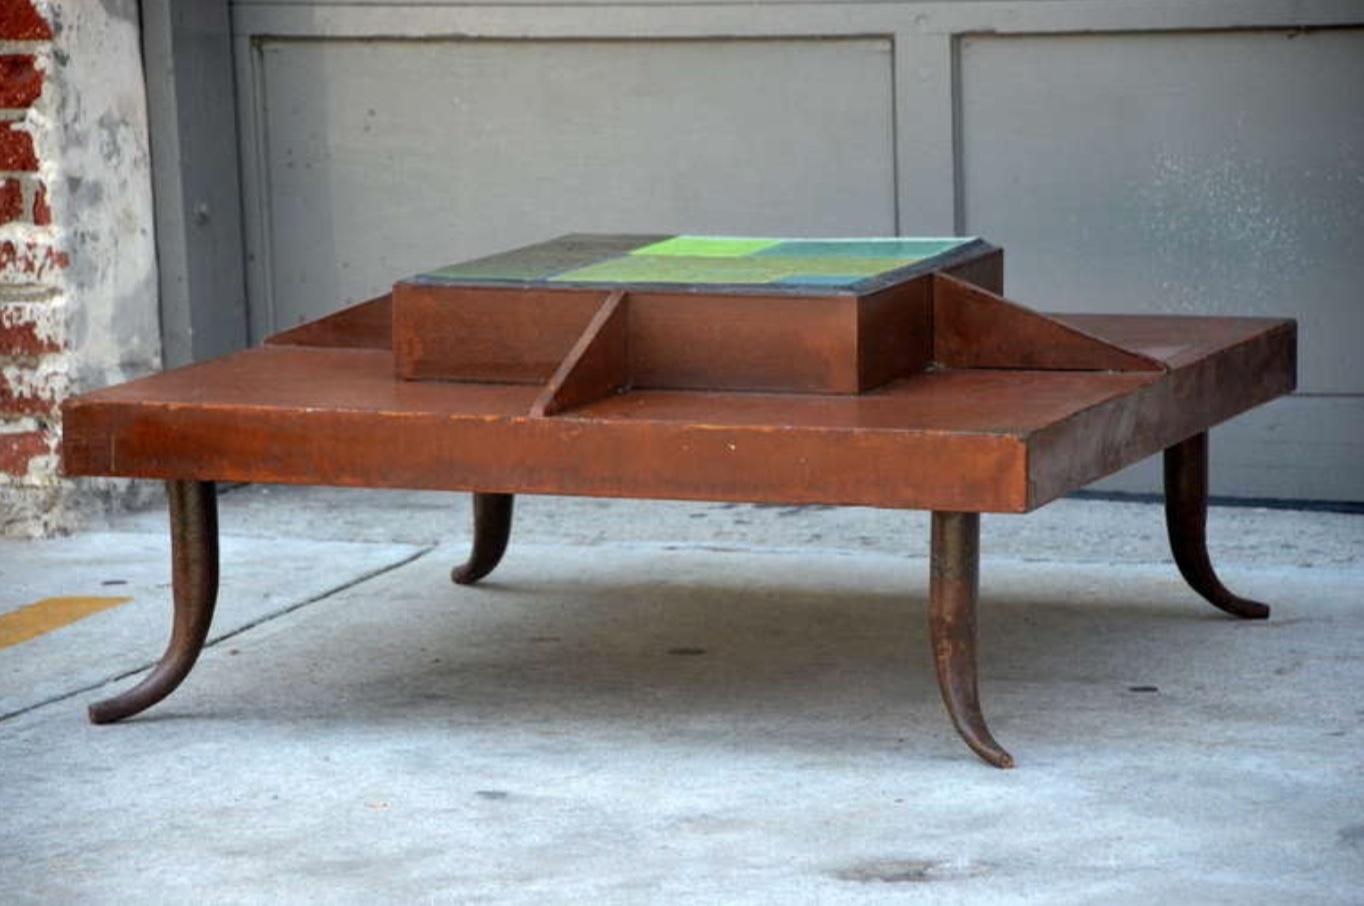 One-of-a-Kind Patinated Steel and Tile Studio Art Coffee Table In Good Condition For Sale In Los Angeles, CA